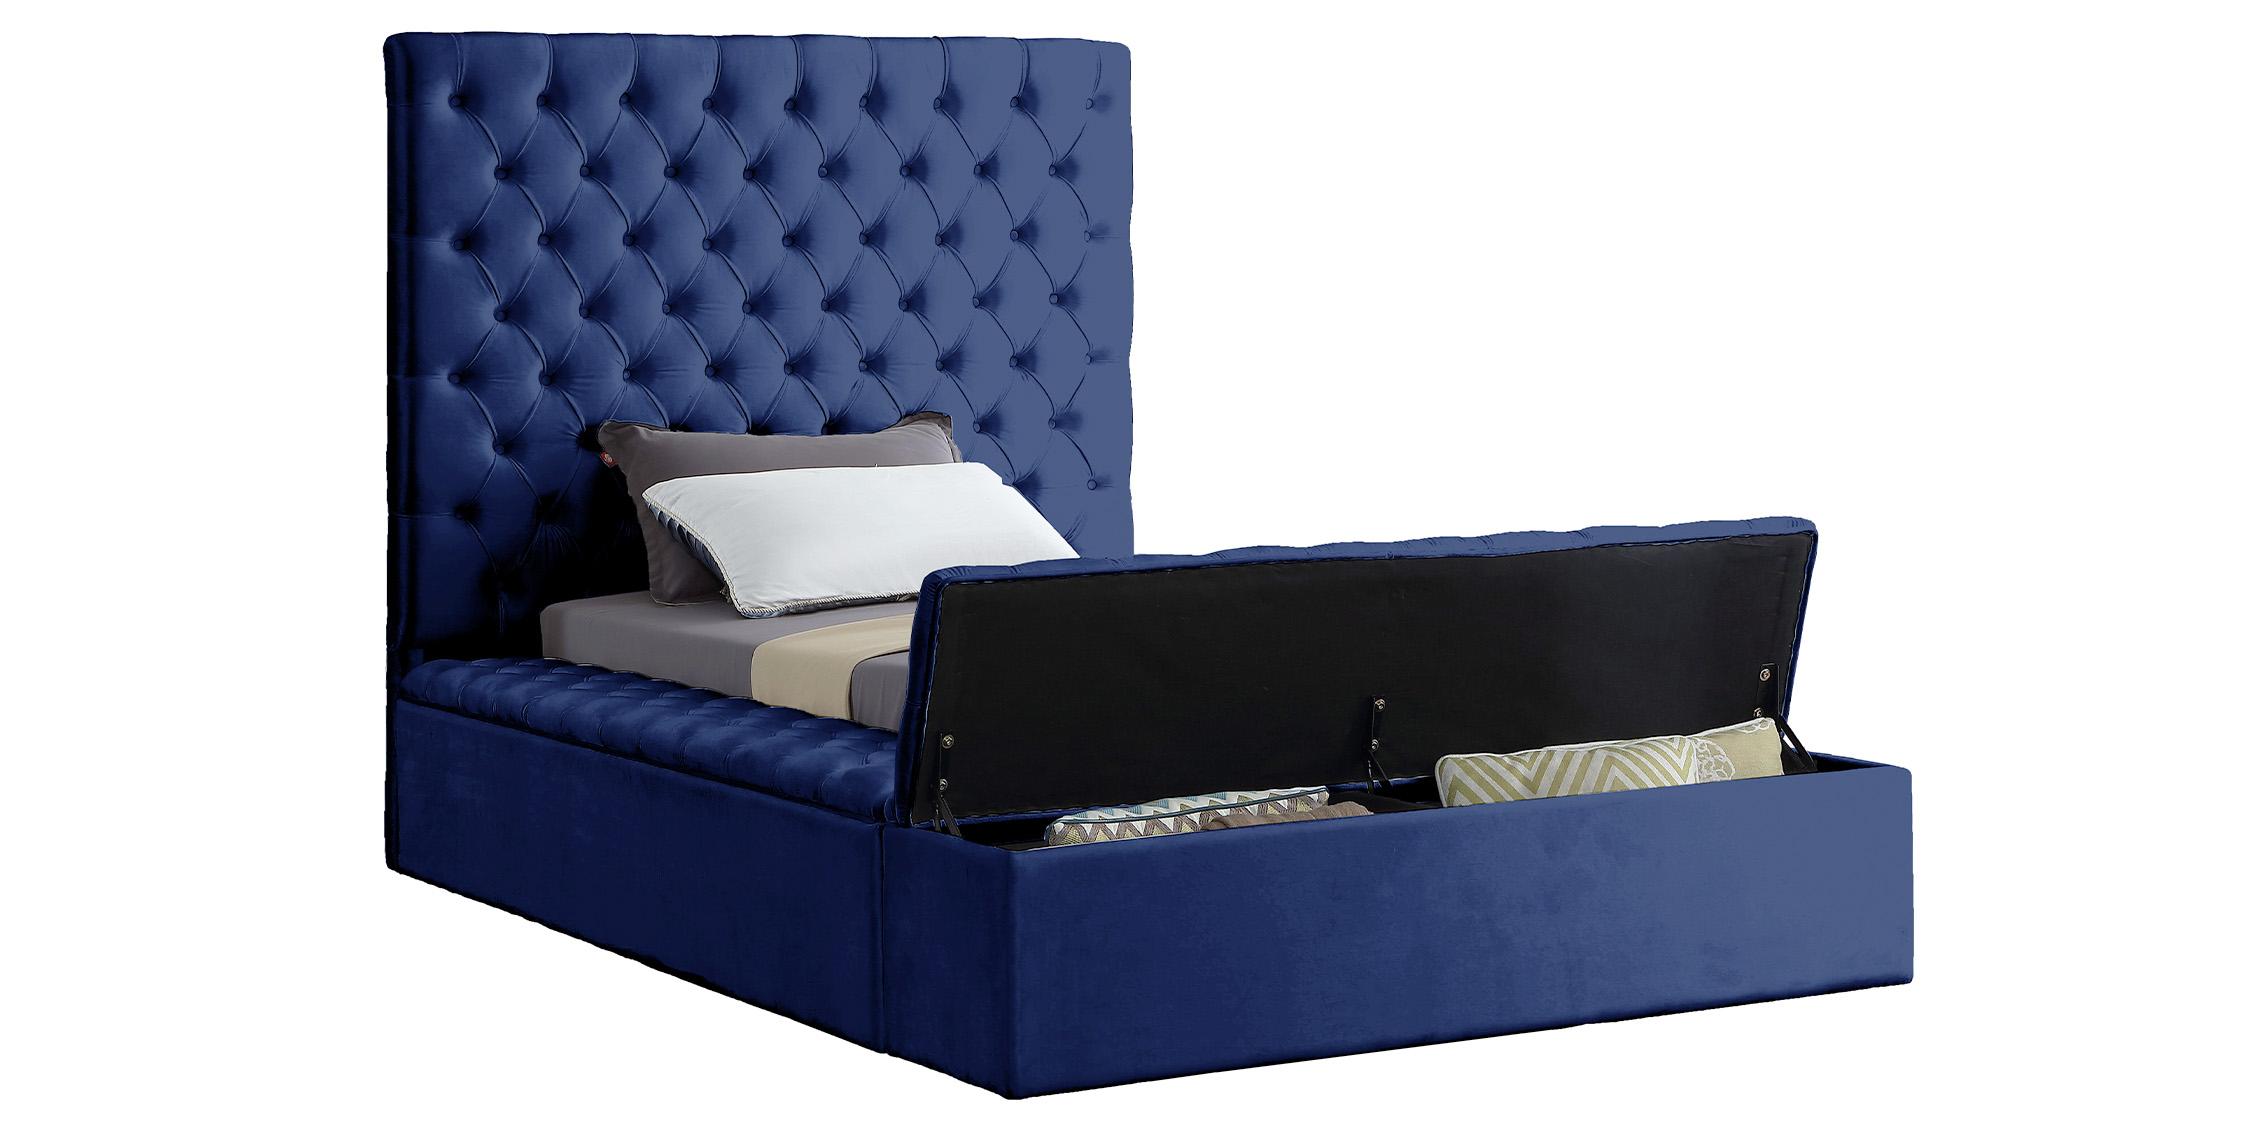 

    
BlissNavy-T Meridian Furniture Storage Bed
